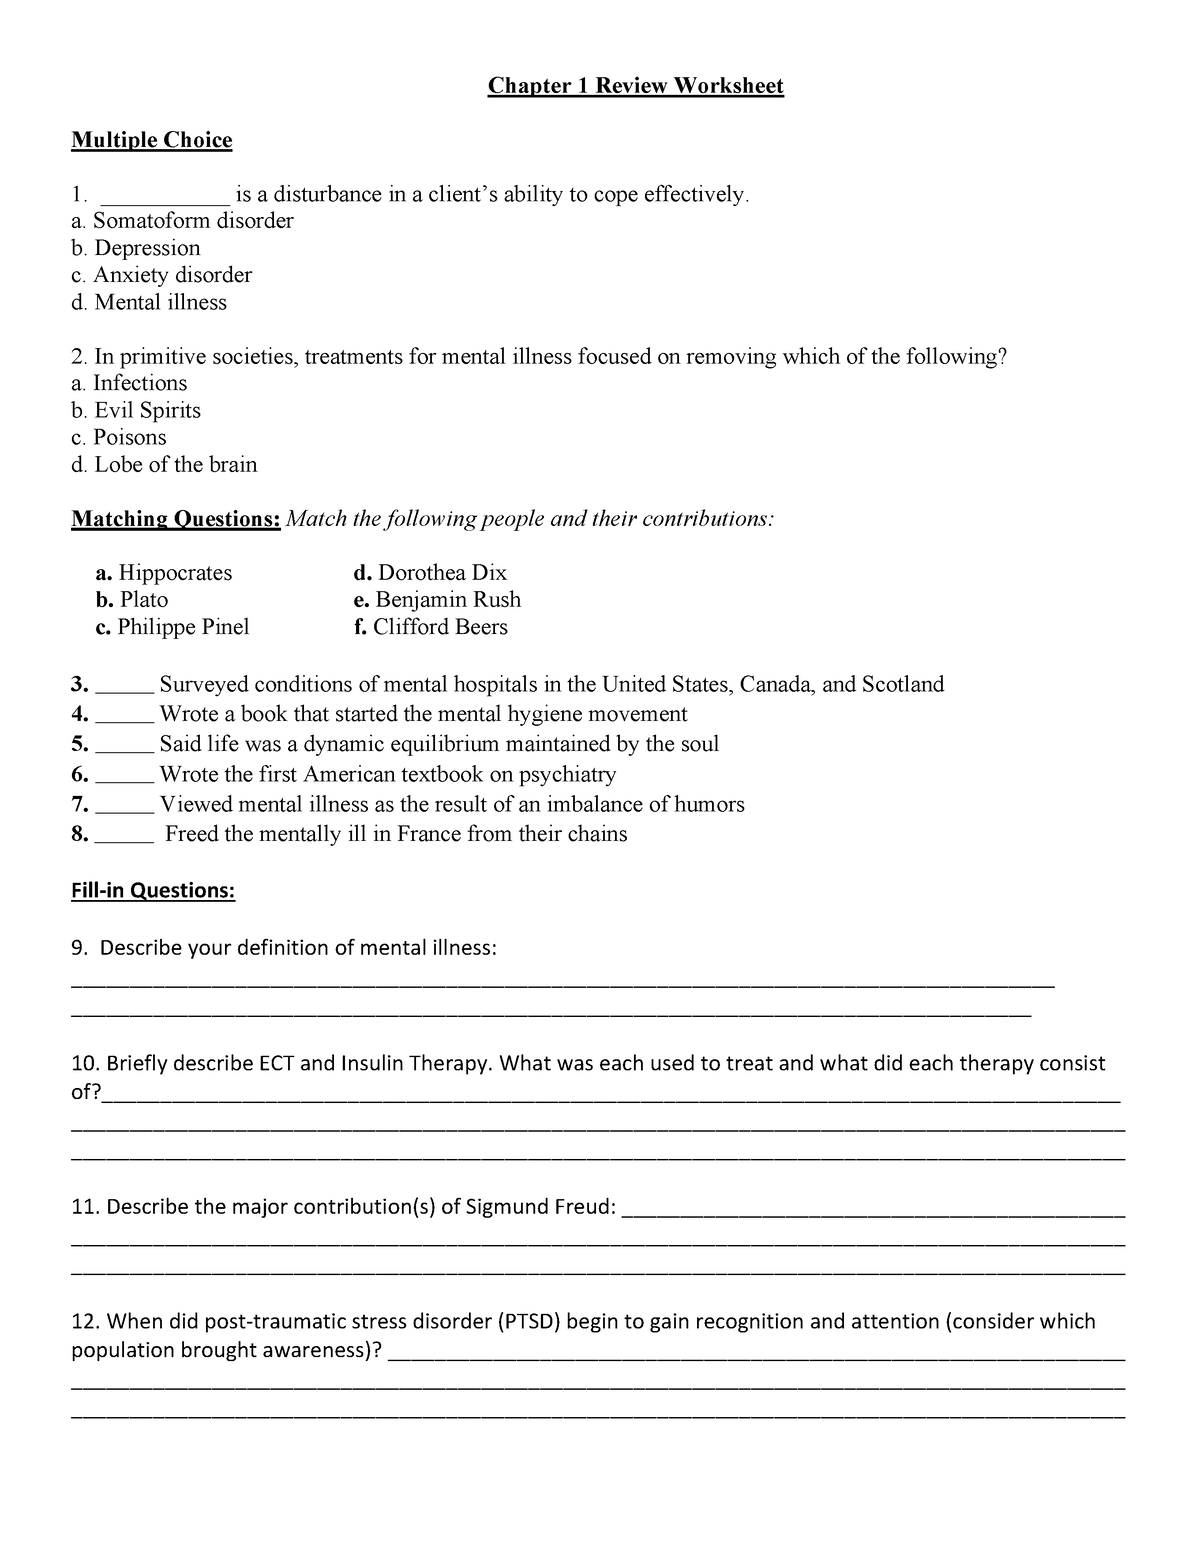 ch-1-worksheet-peds-for-gurnick-chapter-1-review-worksheet